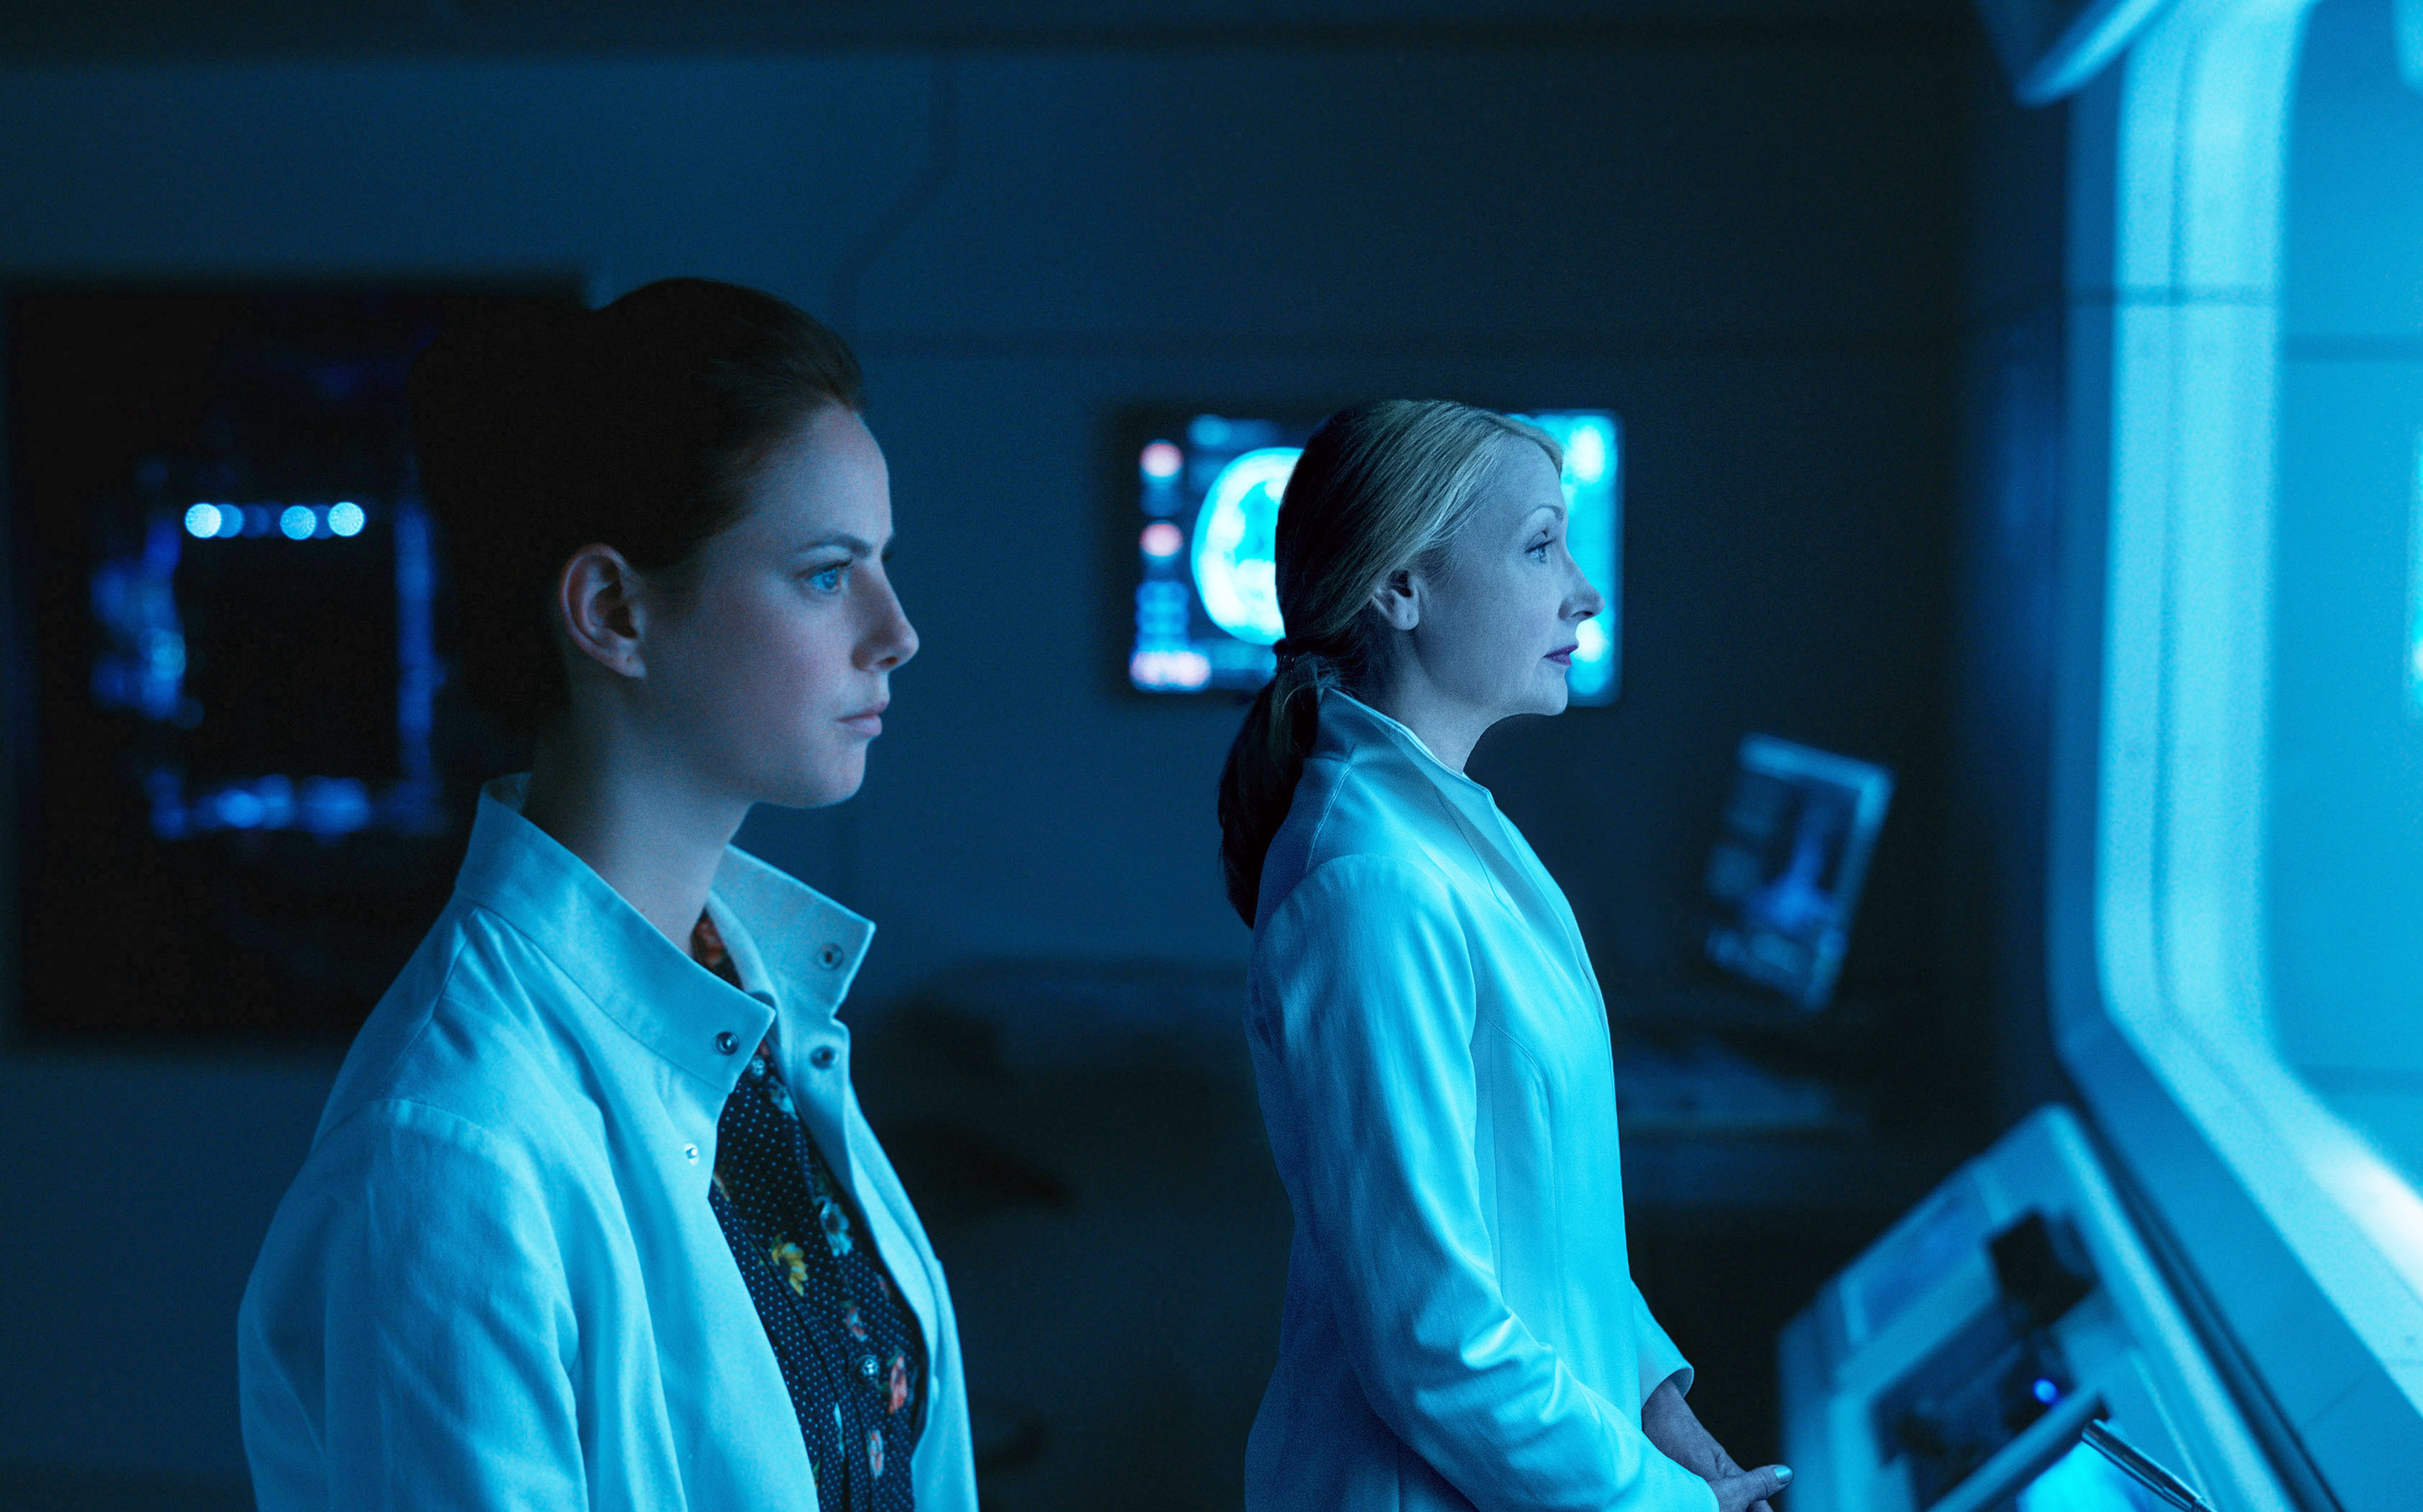 Teresa with Ava in a control room